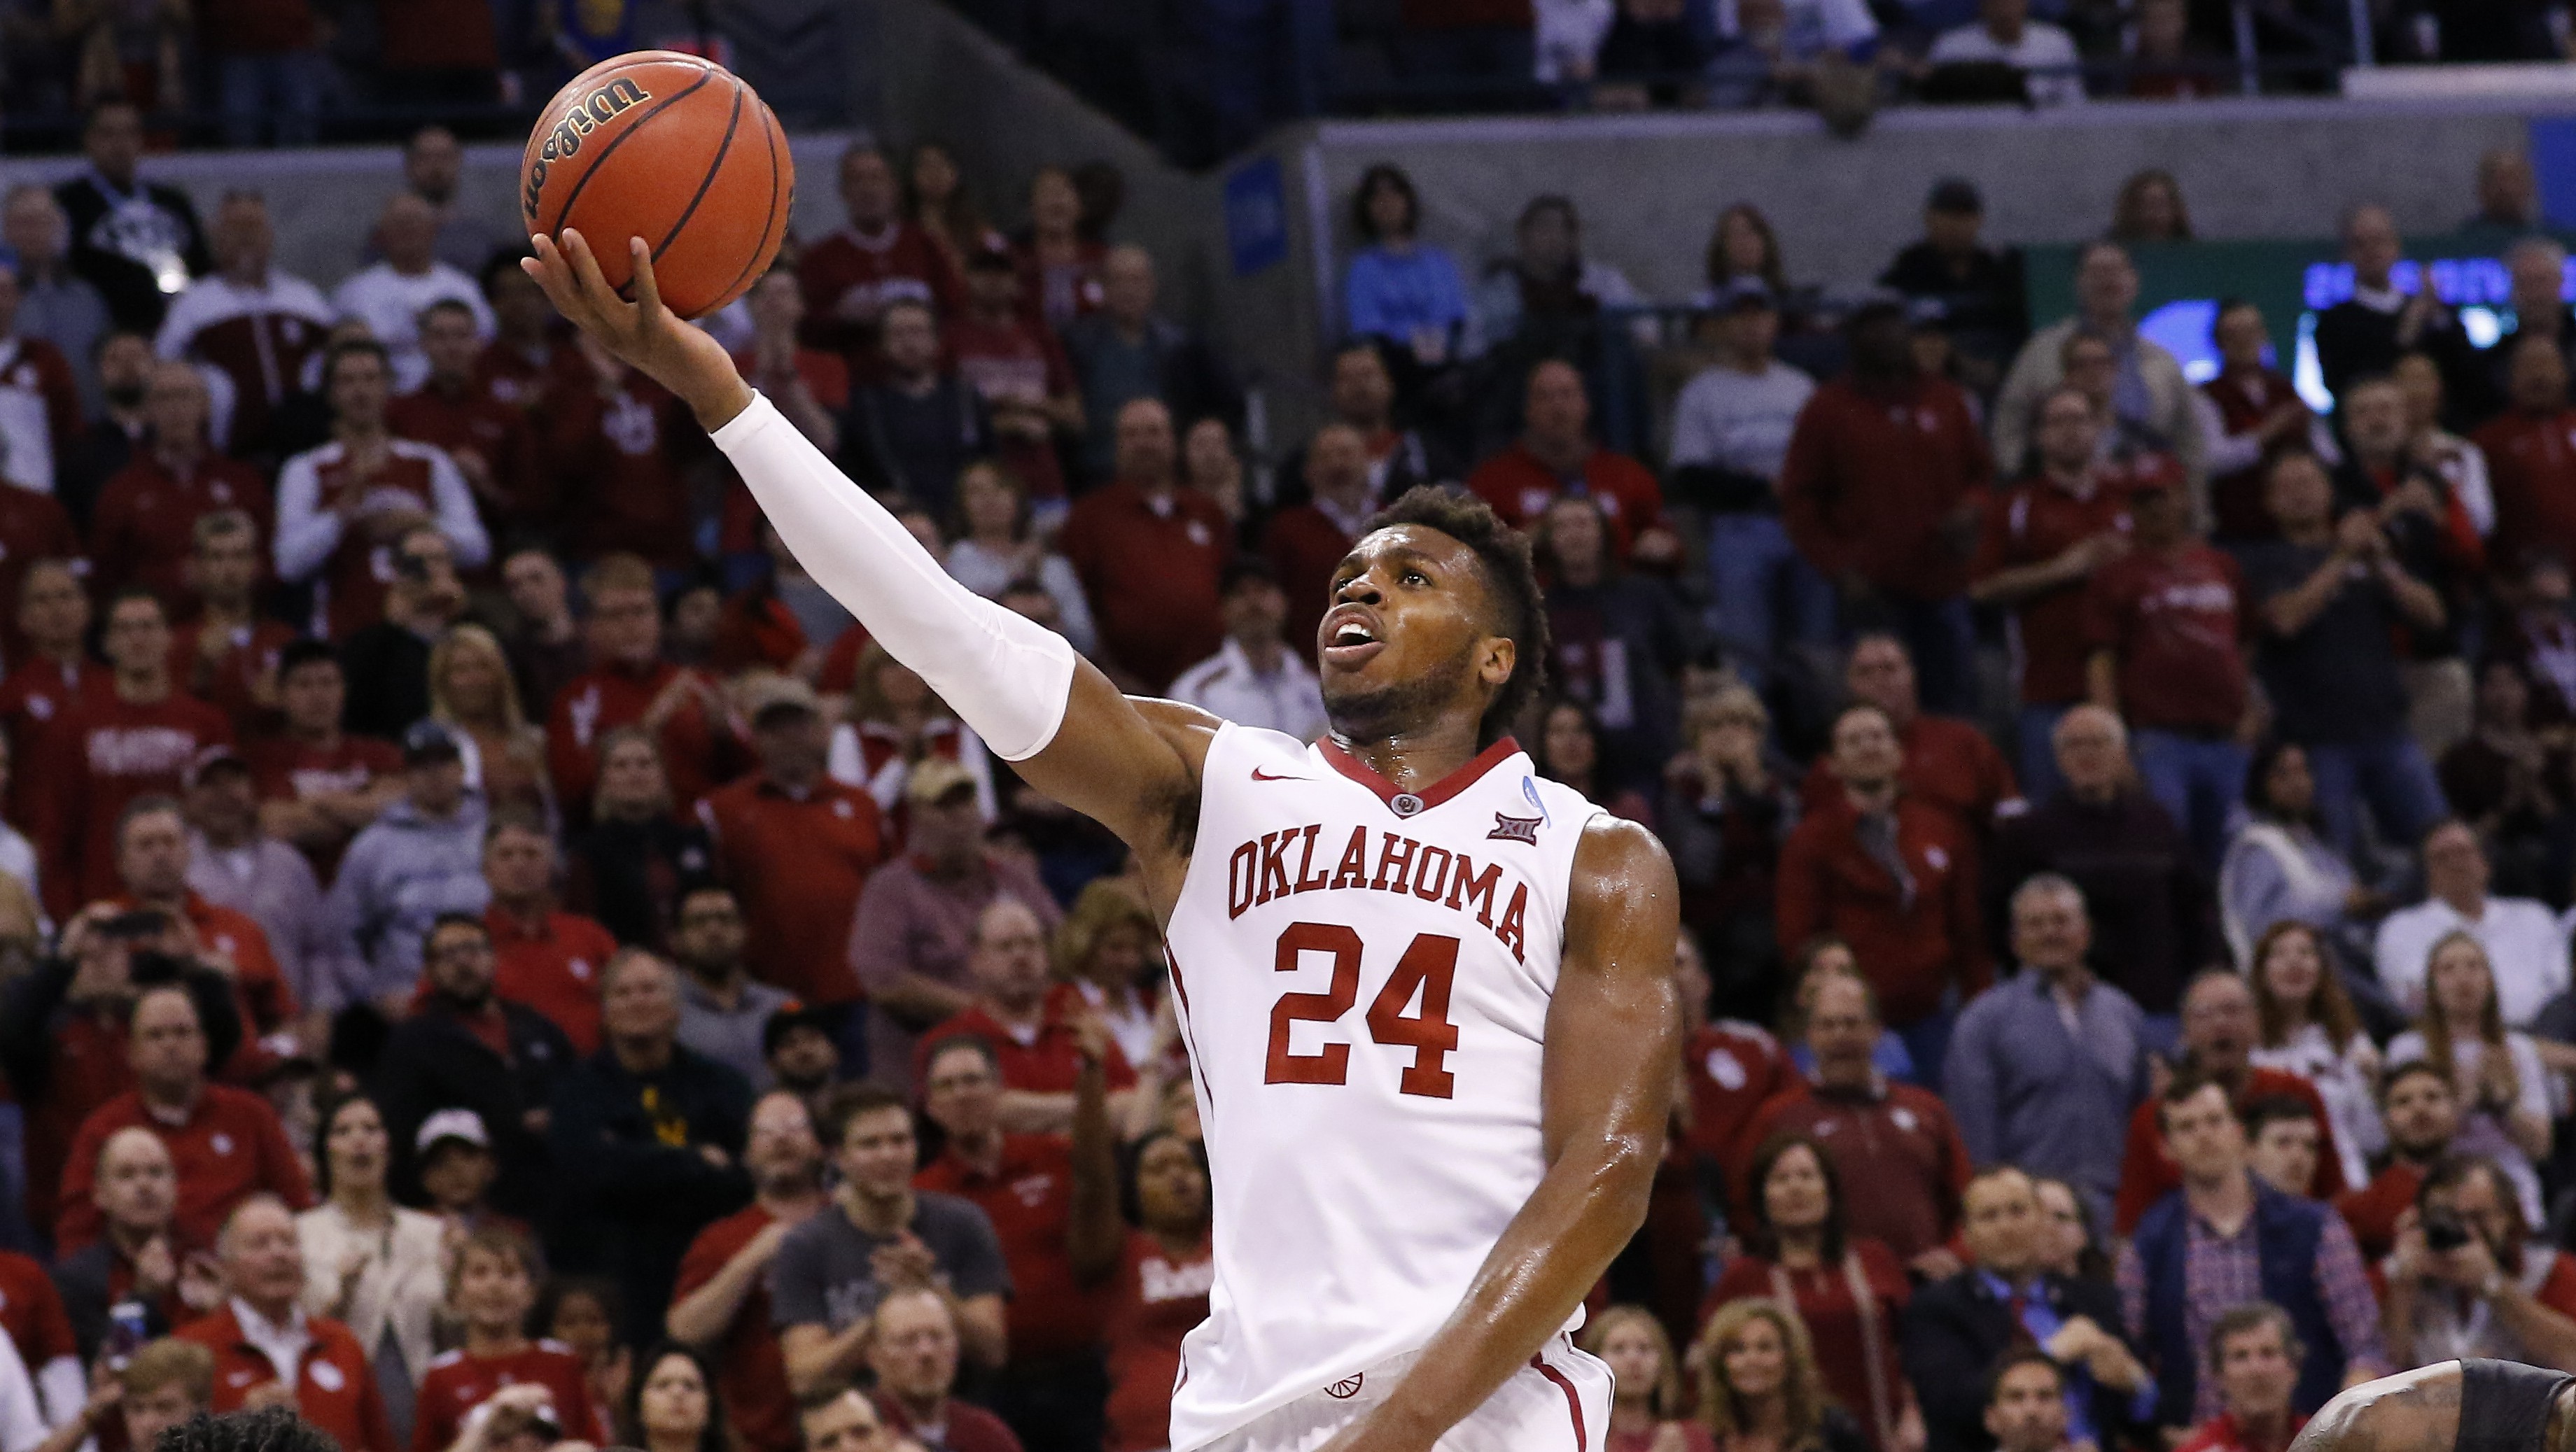 Oklahoma guard Buddy Hield (24) goes up for a basket against VCU in the second half during a second-round men's college basketball game in the NCAA Tournament in Oklahoma City, Sunday, March 20, 2016. Oklahoma won 85-81. (AP Photo/Alonzo Adams)